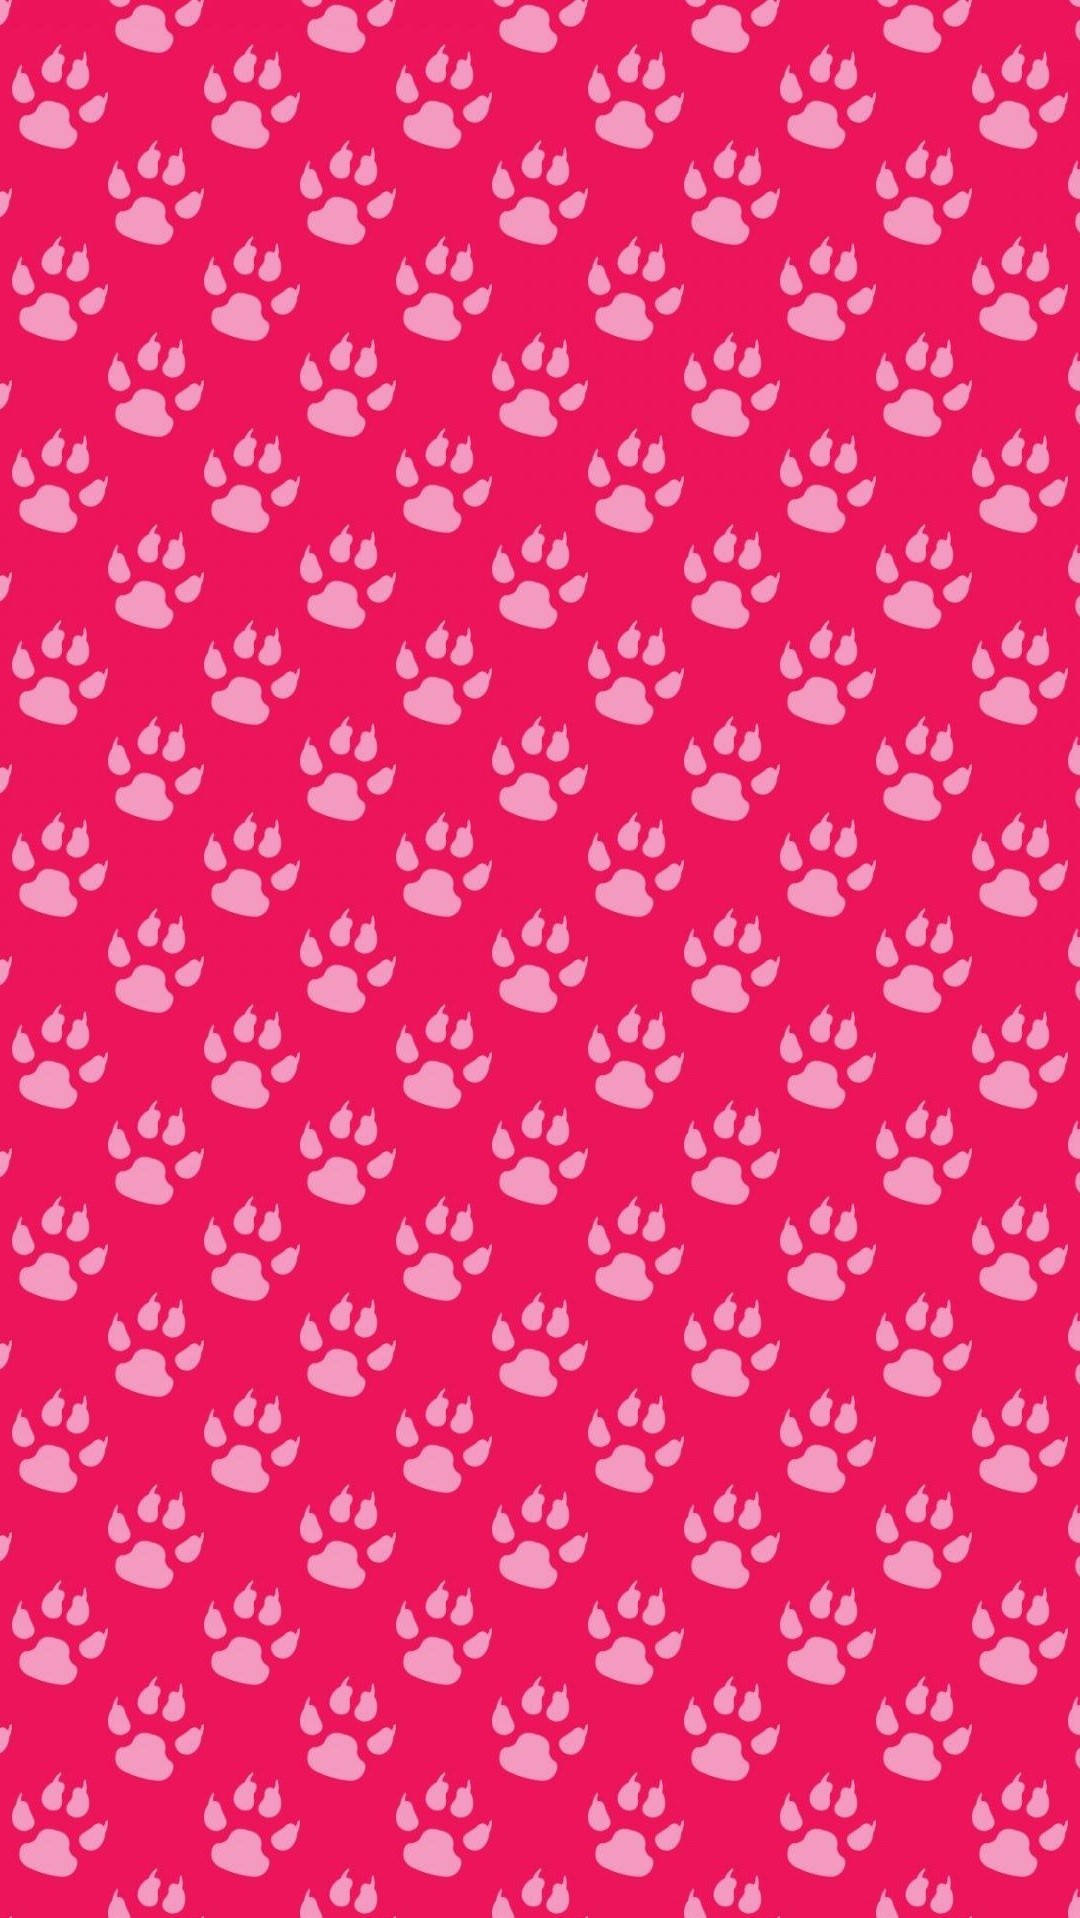 45 Paw Print Wallpapers & Backgrounds